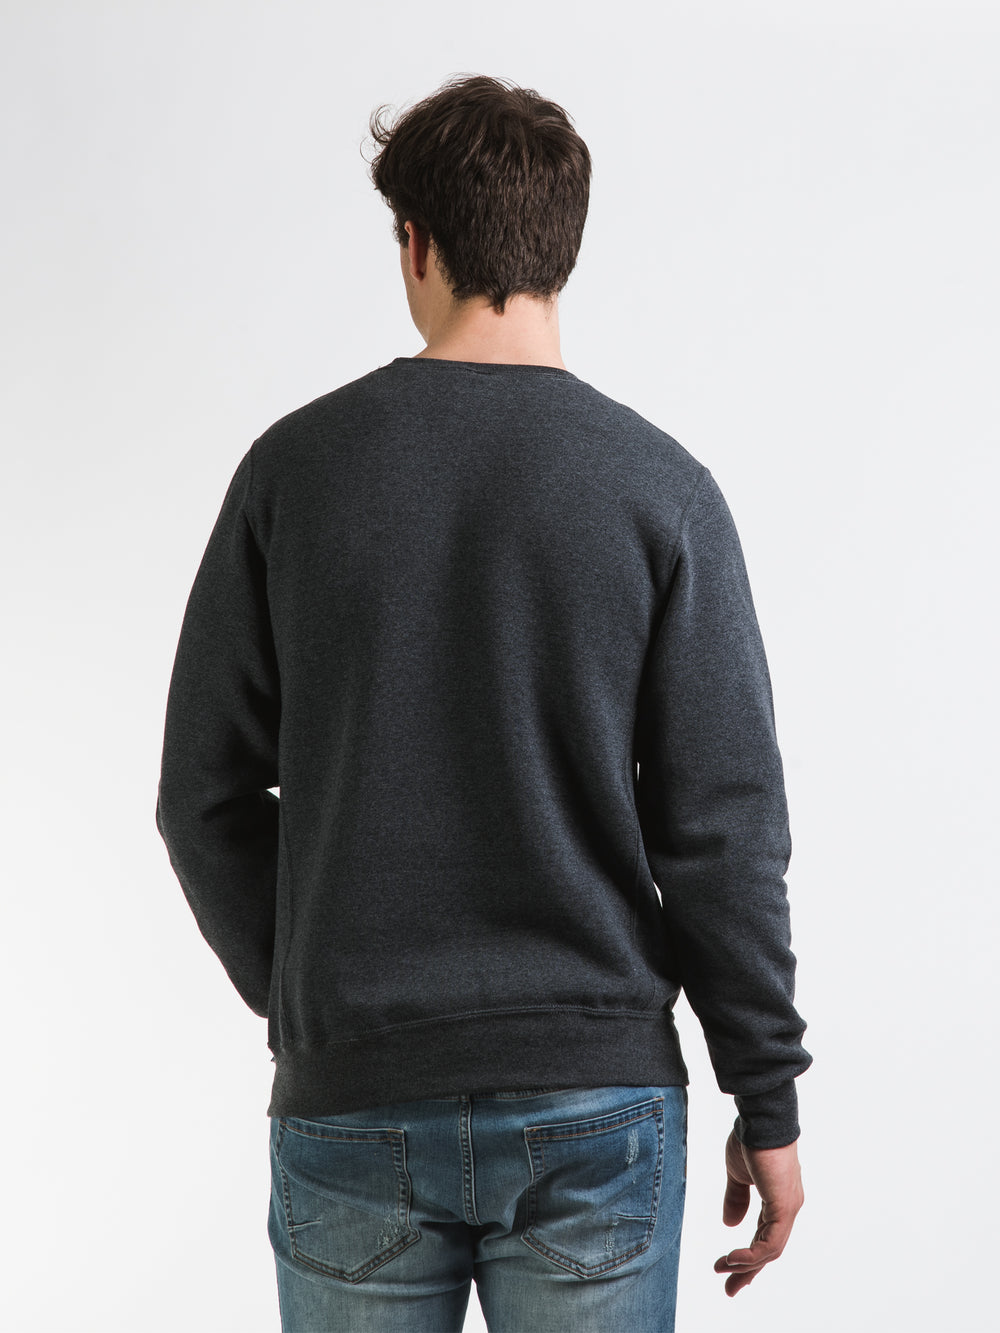 RUSSELL GEORGETOWN CREWNECK - CLEARANCE